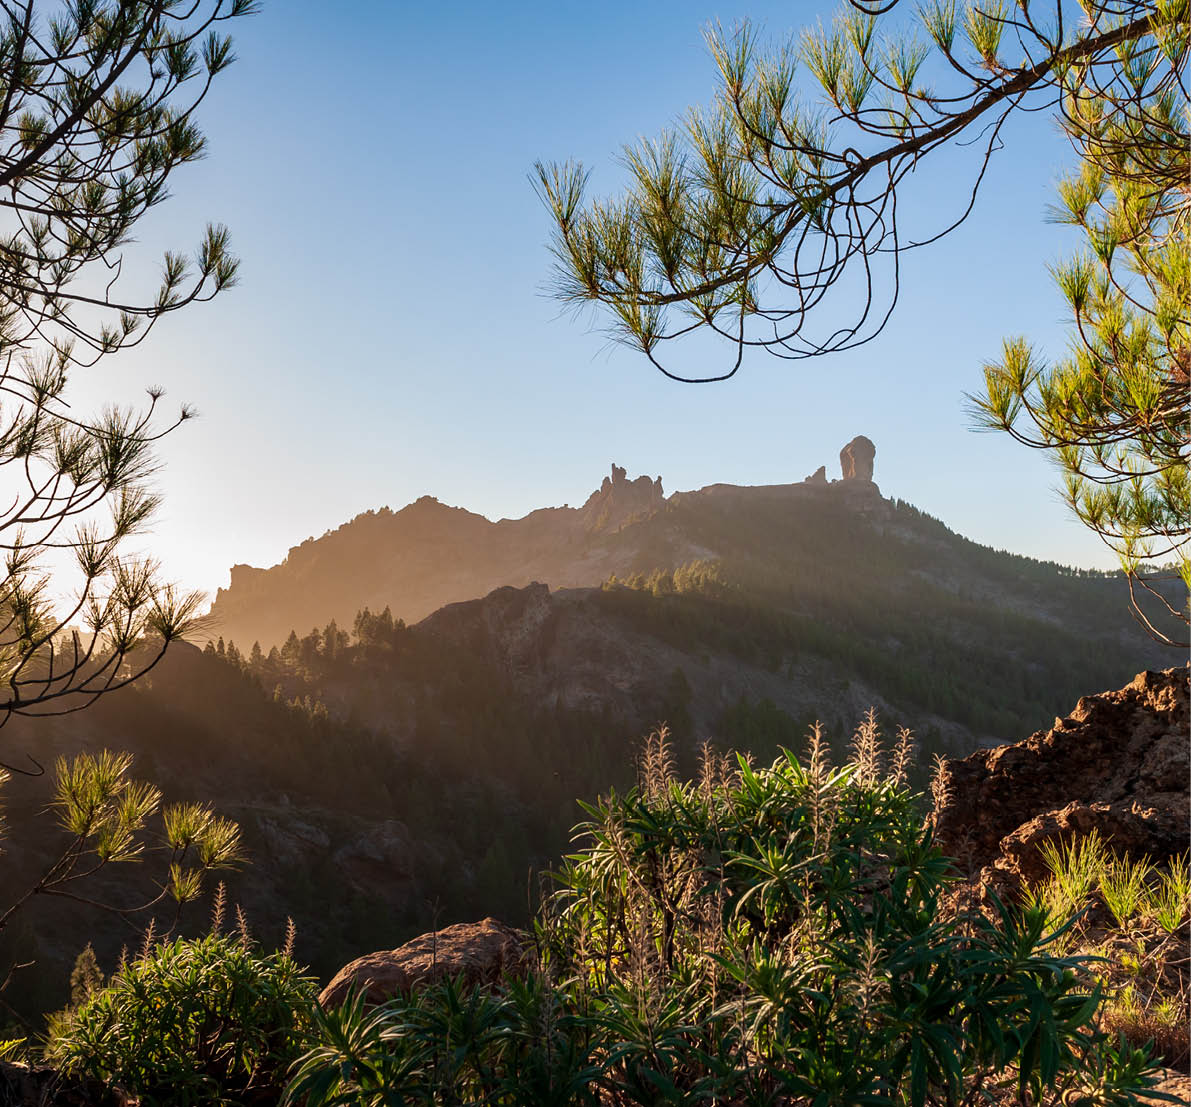 Roque Nublo, symbolic natural monument of Gran Canaria, Canary Islands in backlight sunset evening light lined with pine trees. Emblematic volcanic rock formations in mountains of Gran Canaria Spain.